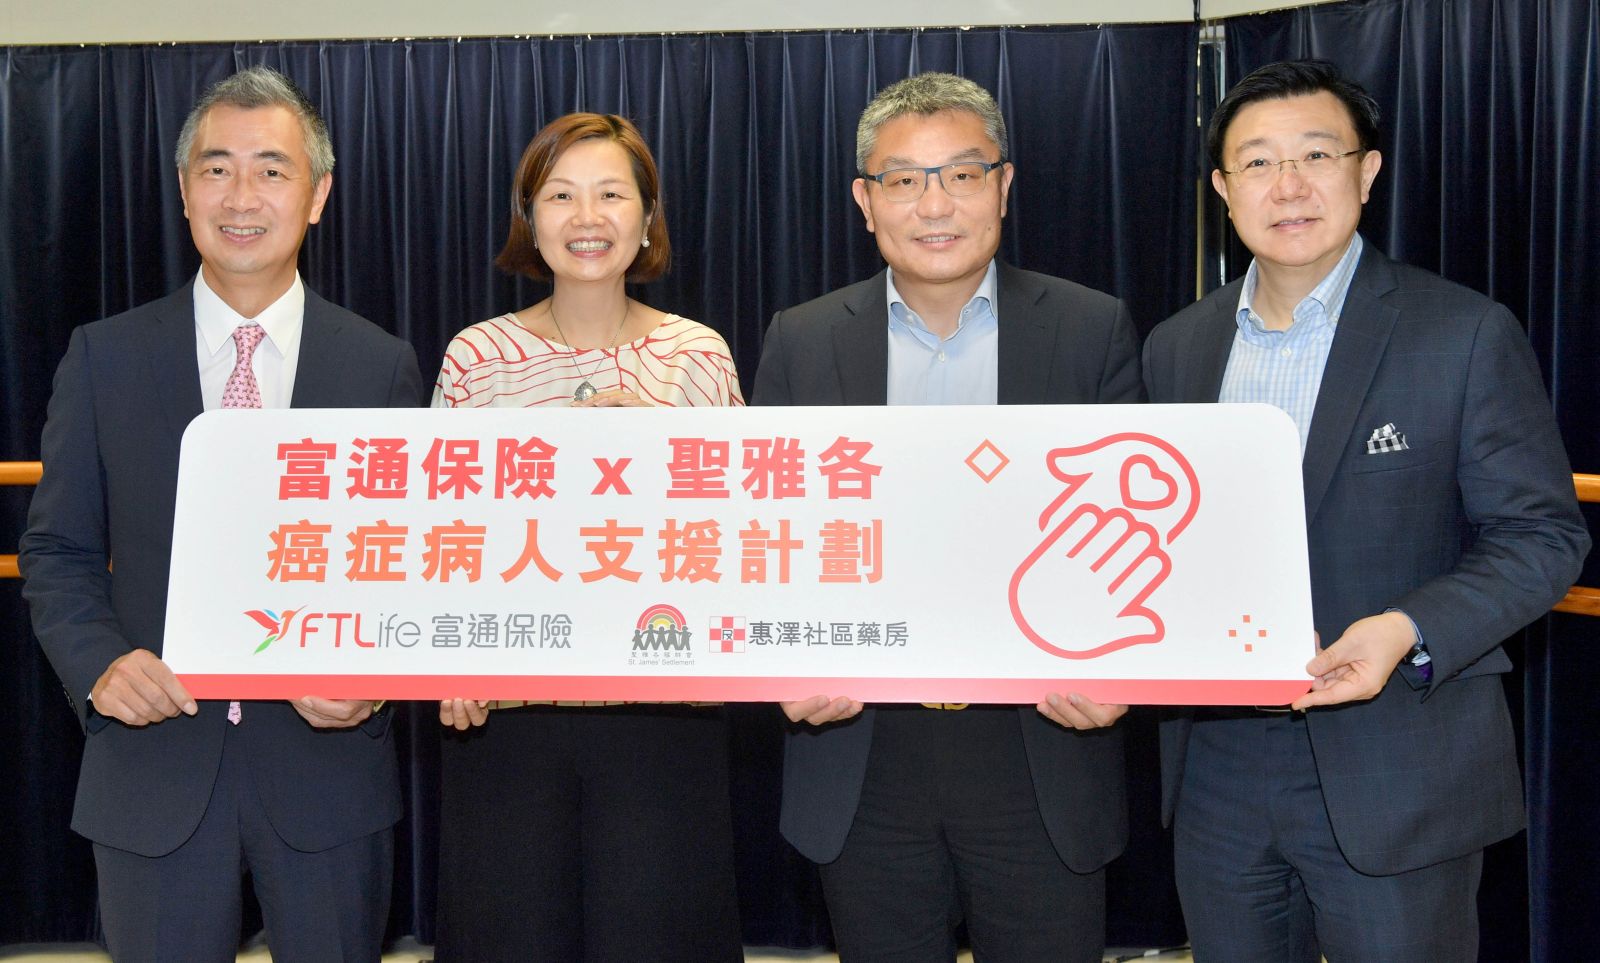 FTLife and the St. James' Settlement launch the “Cancer Patient Support Programme” to provide needy colon and gastrointestinal cancer patients with cash assistance and nutrition packs